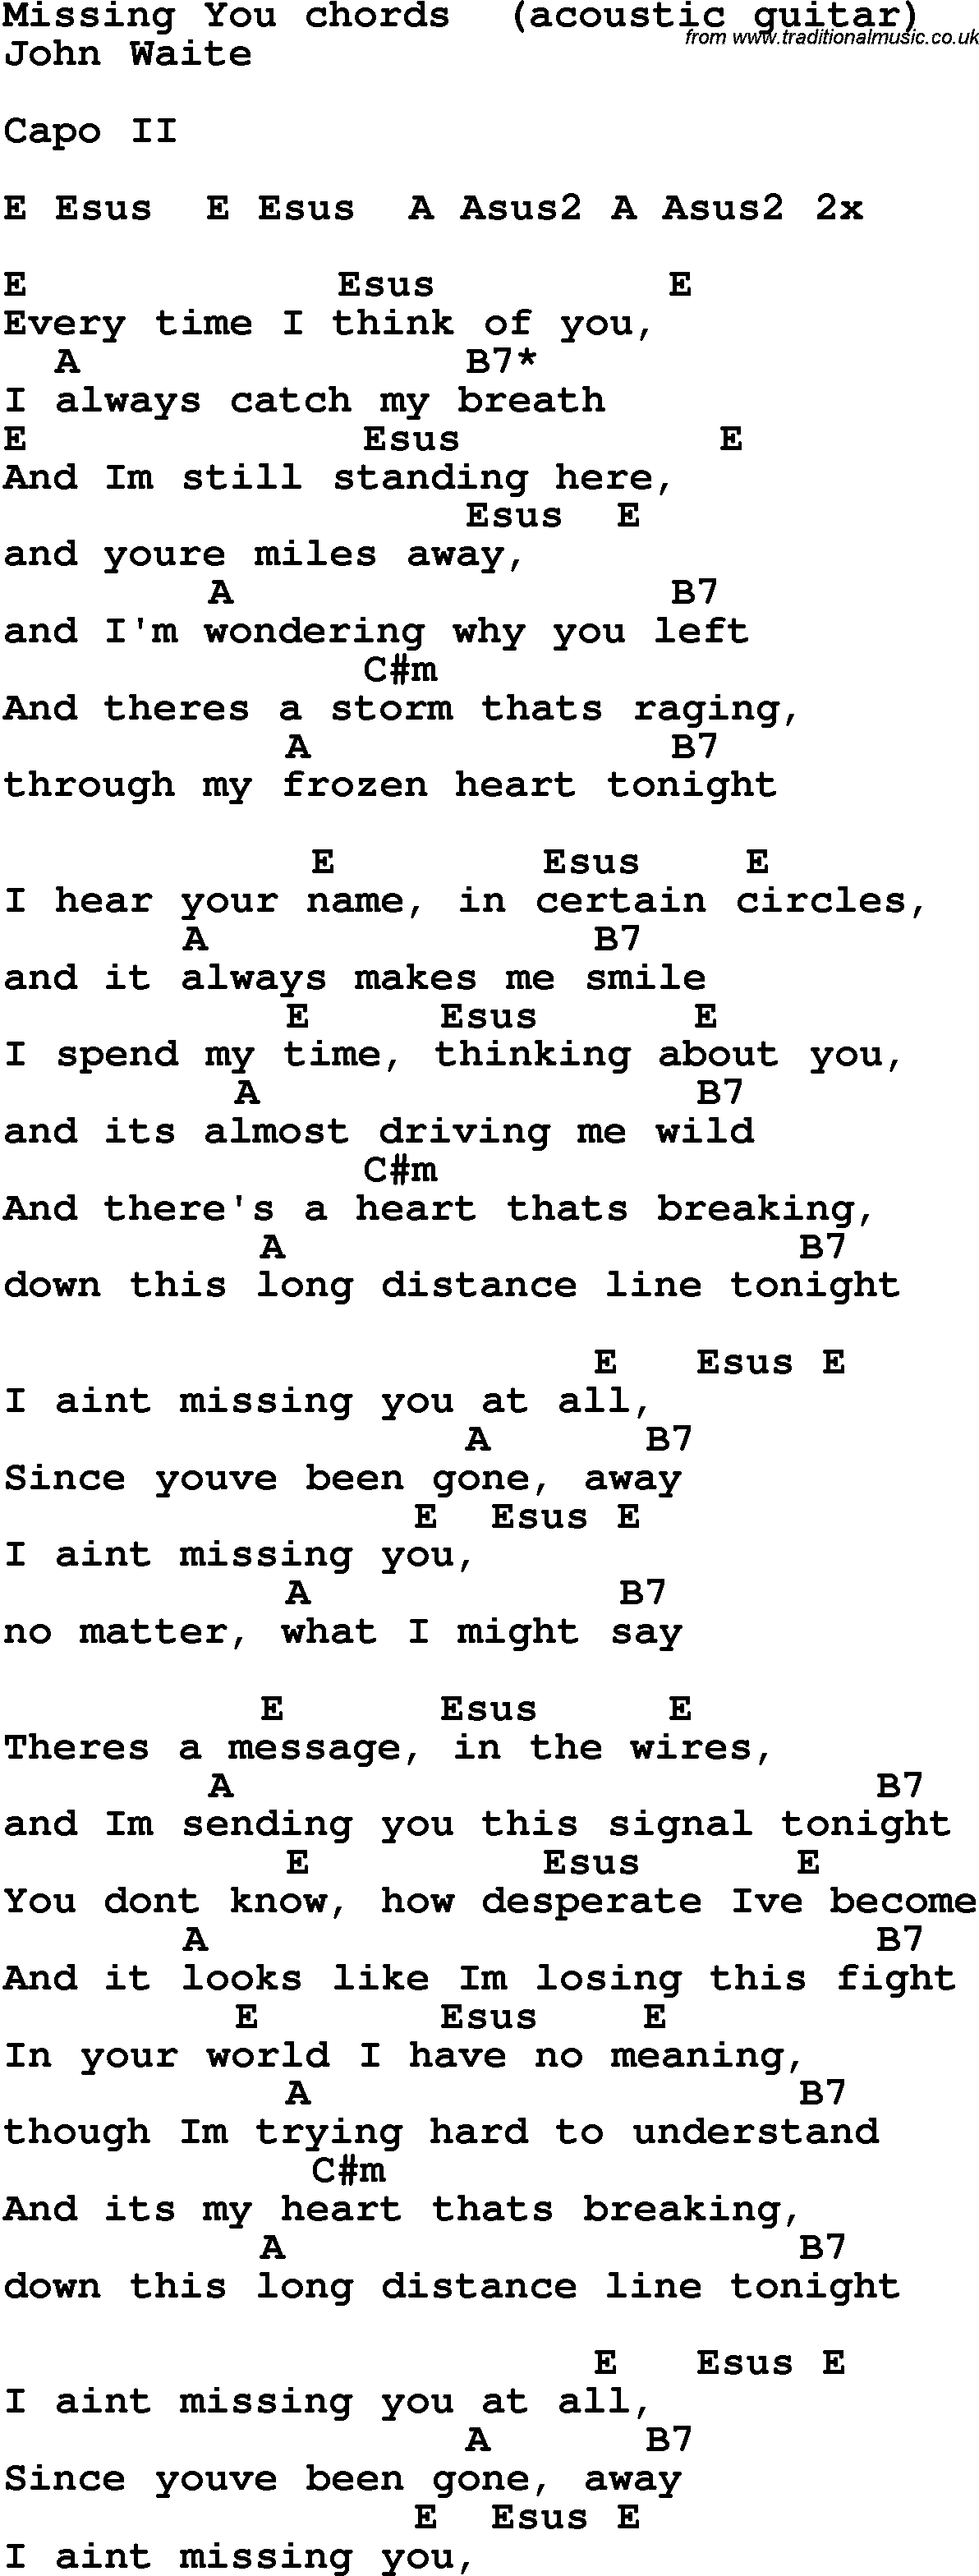 Song Lyrics with guitar chords for Missing You